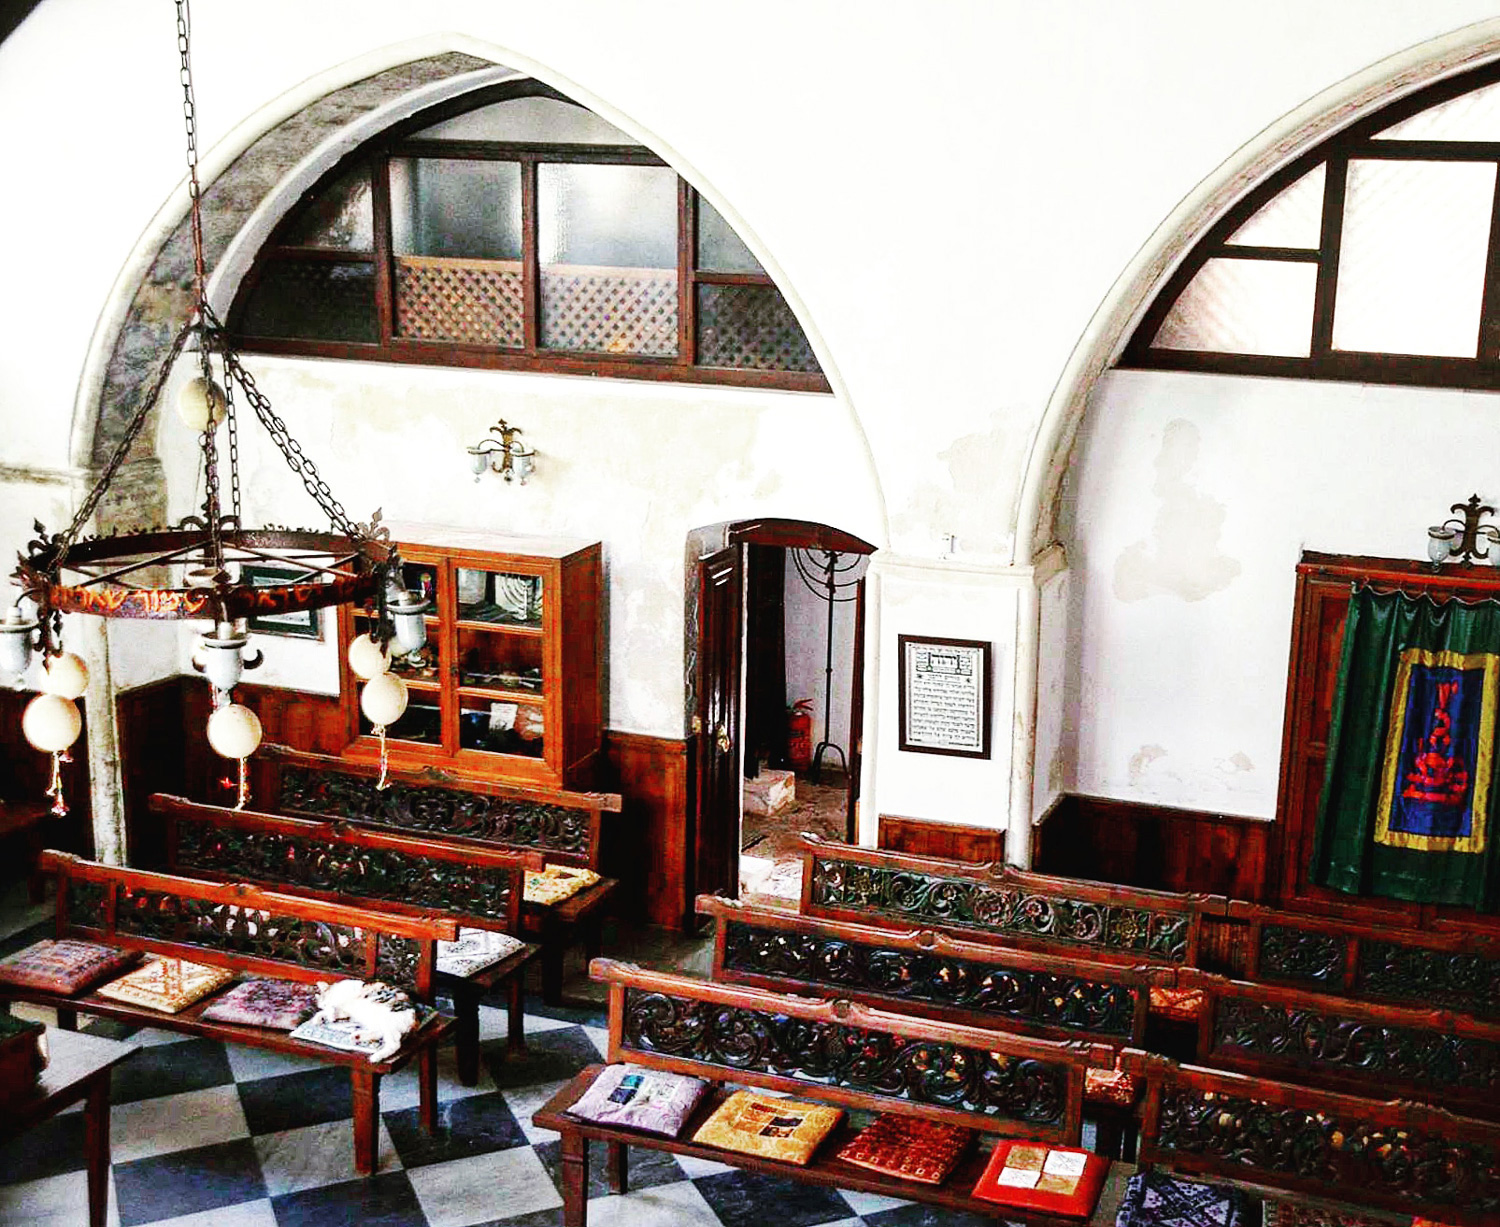 Praying room inside the synagogue